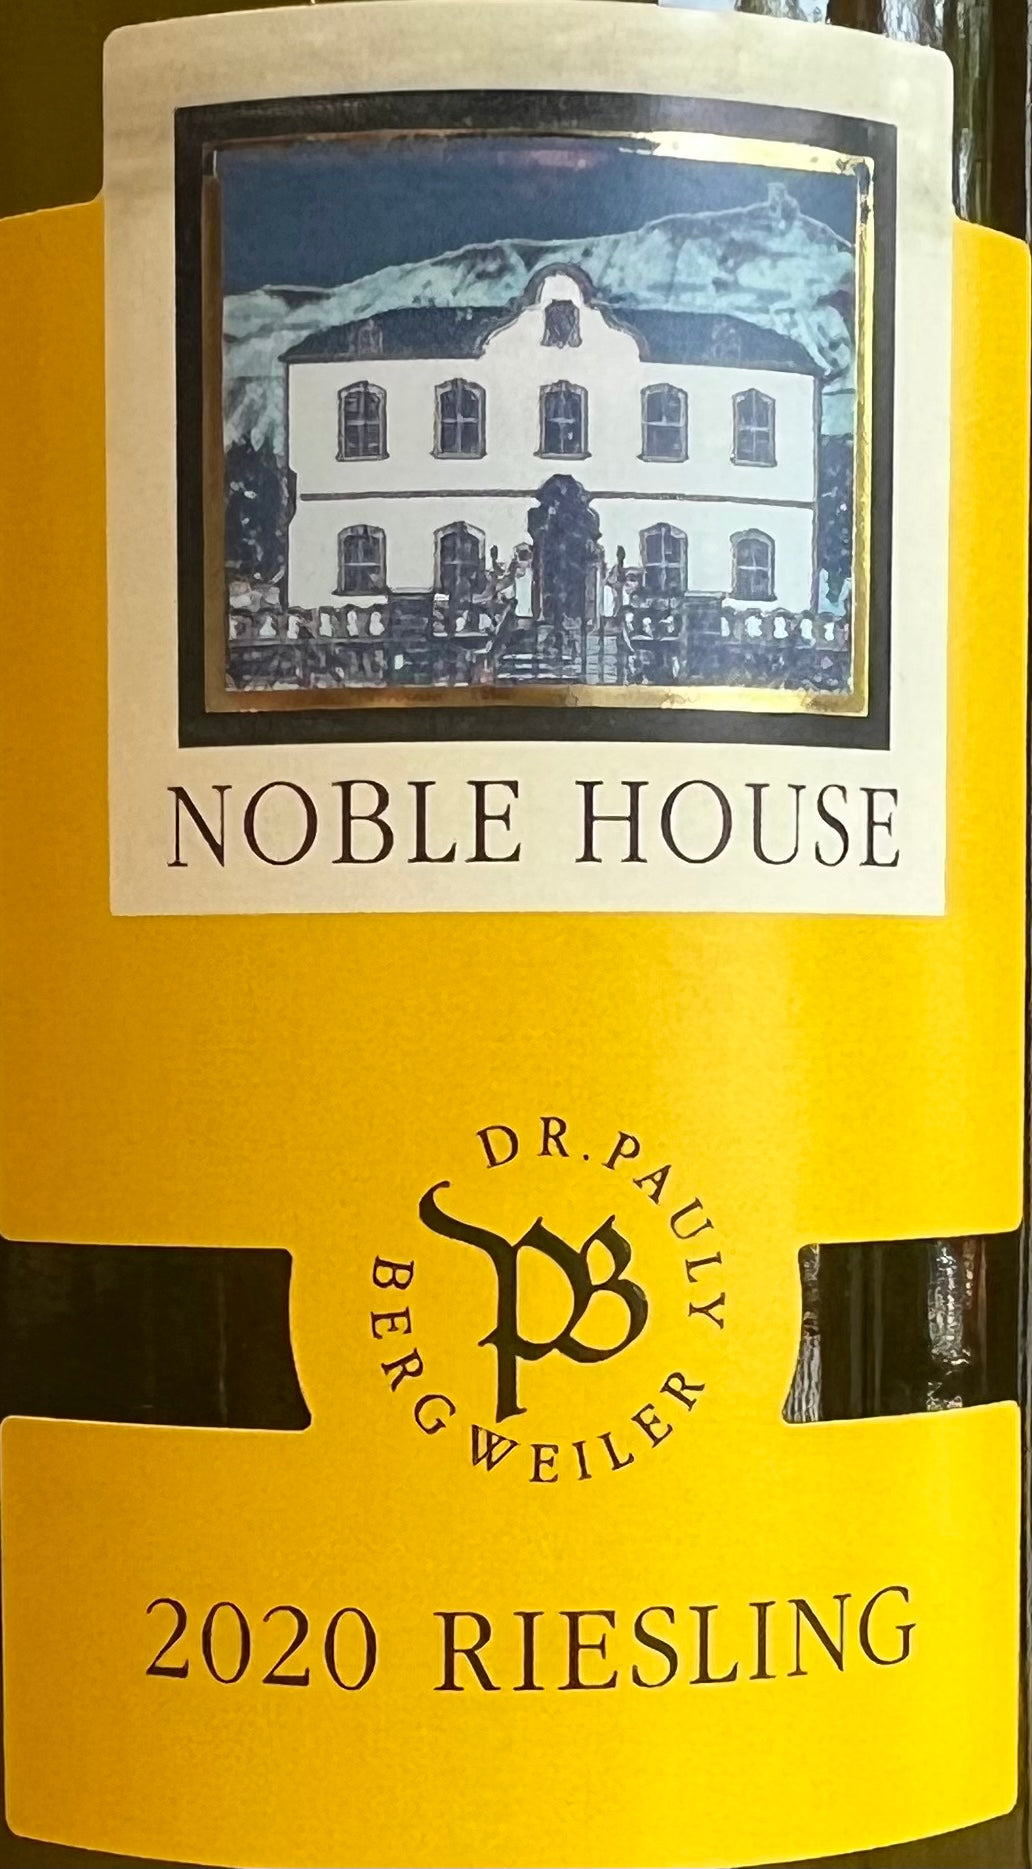 Dr. Pauly Bergweiler "Noble House" - Riesling